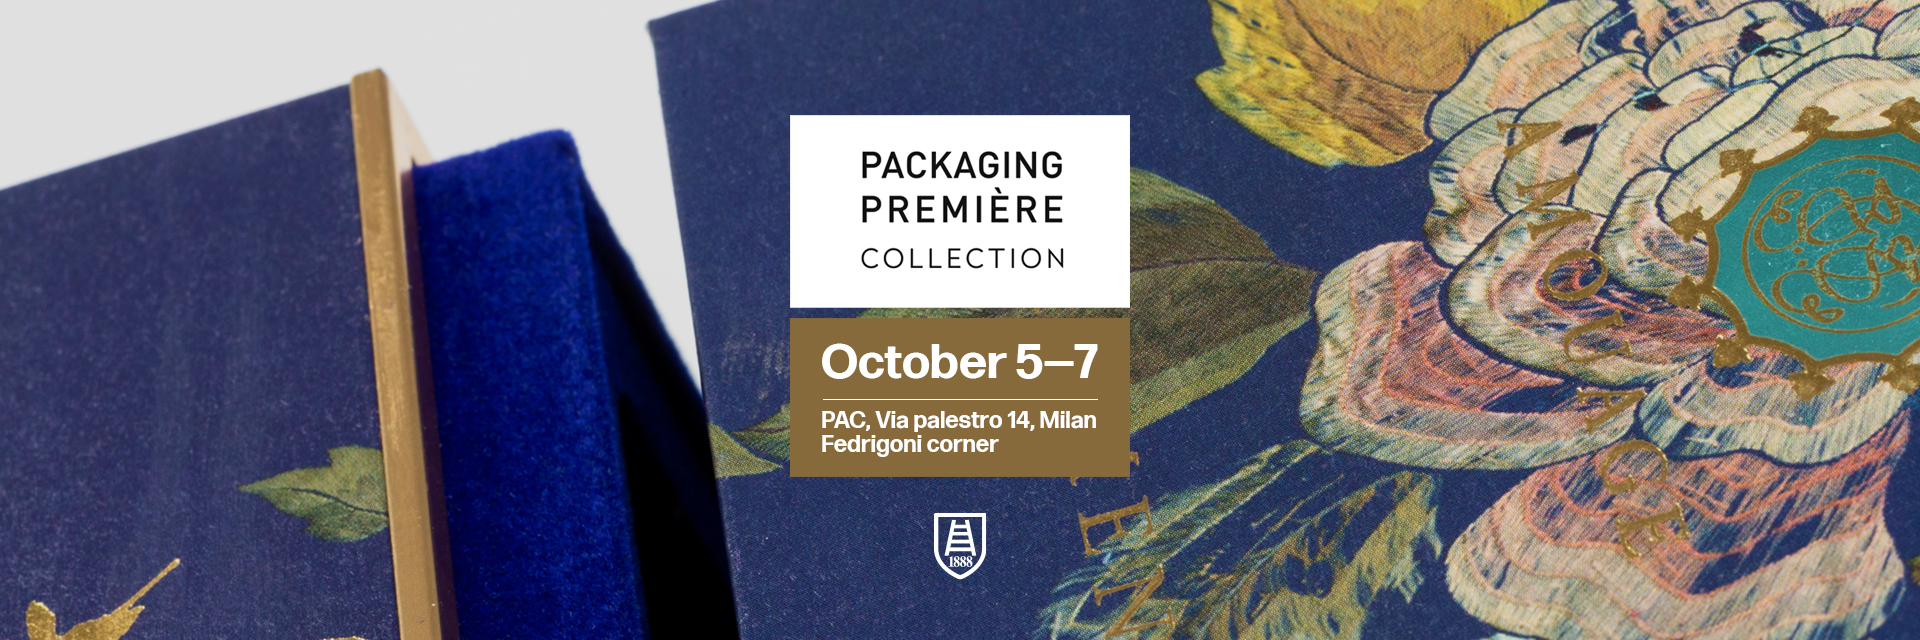 Visit us at Packaging Premiere Collection